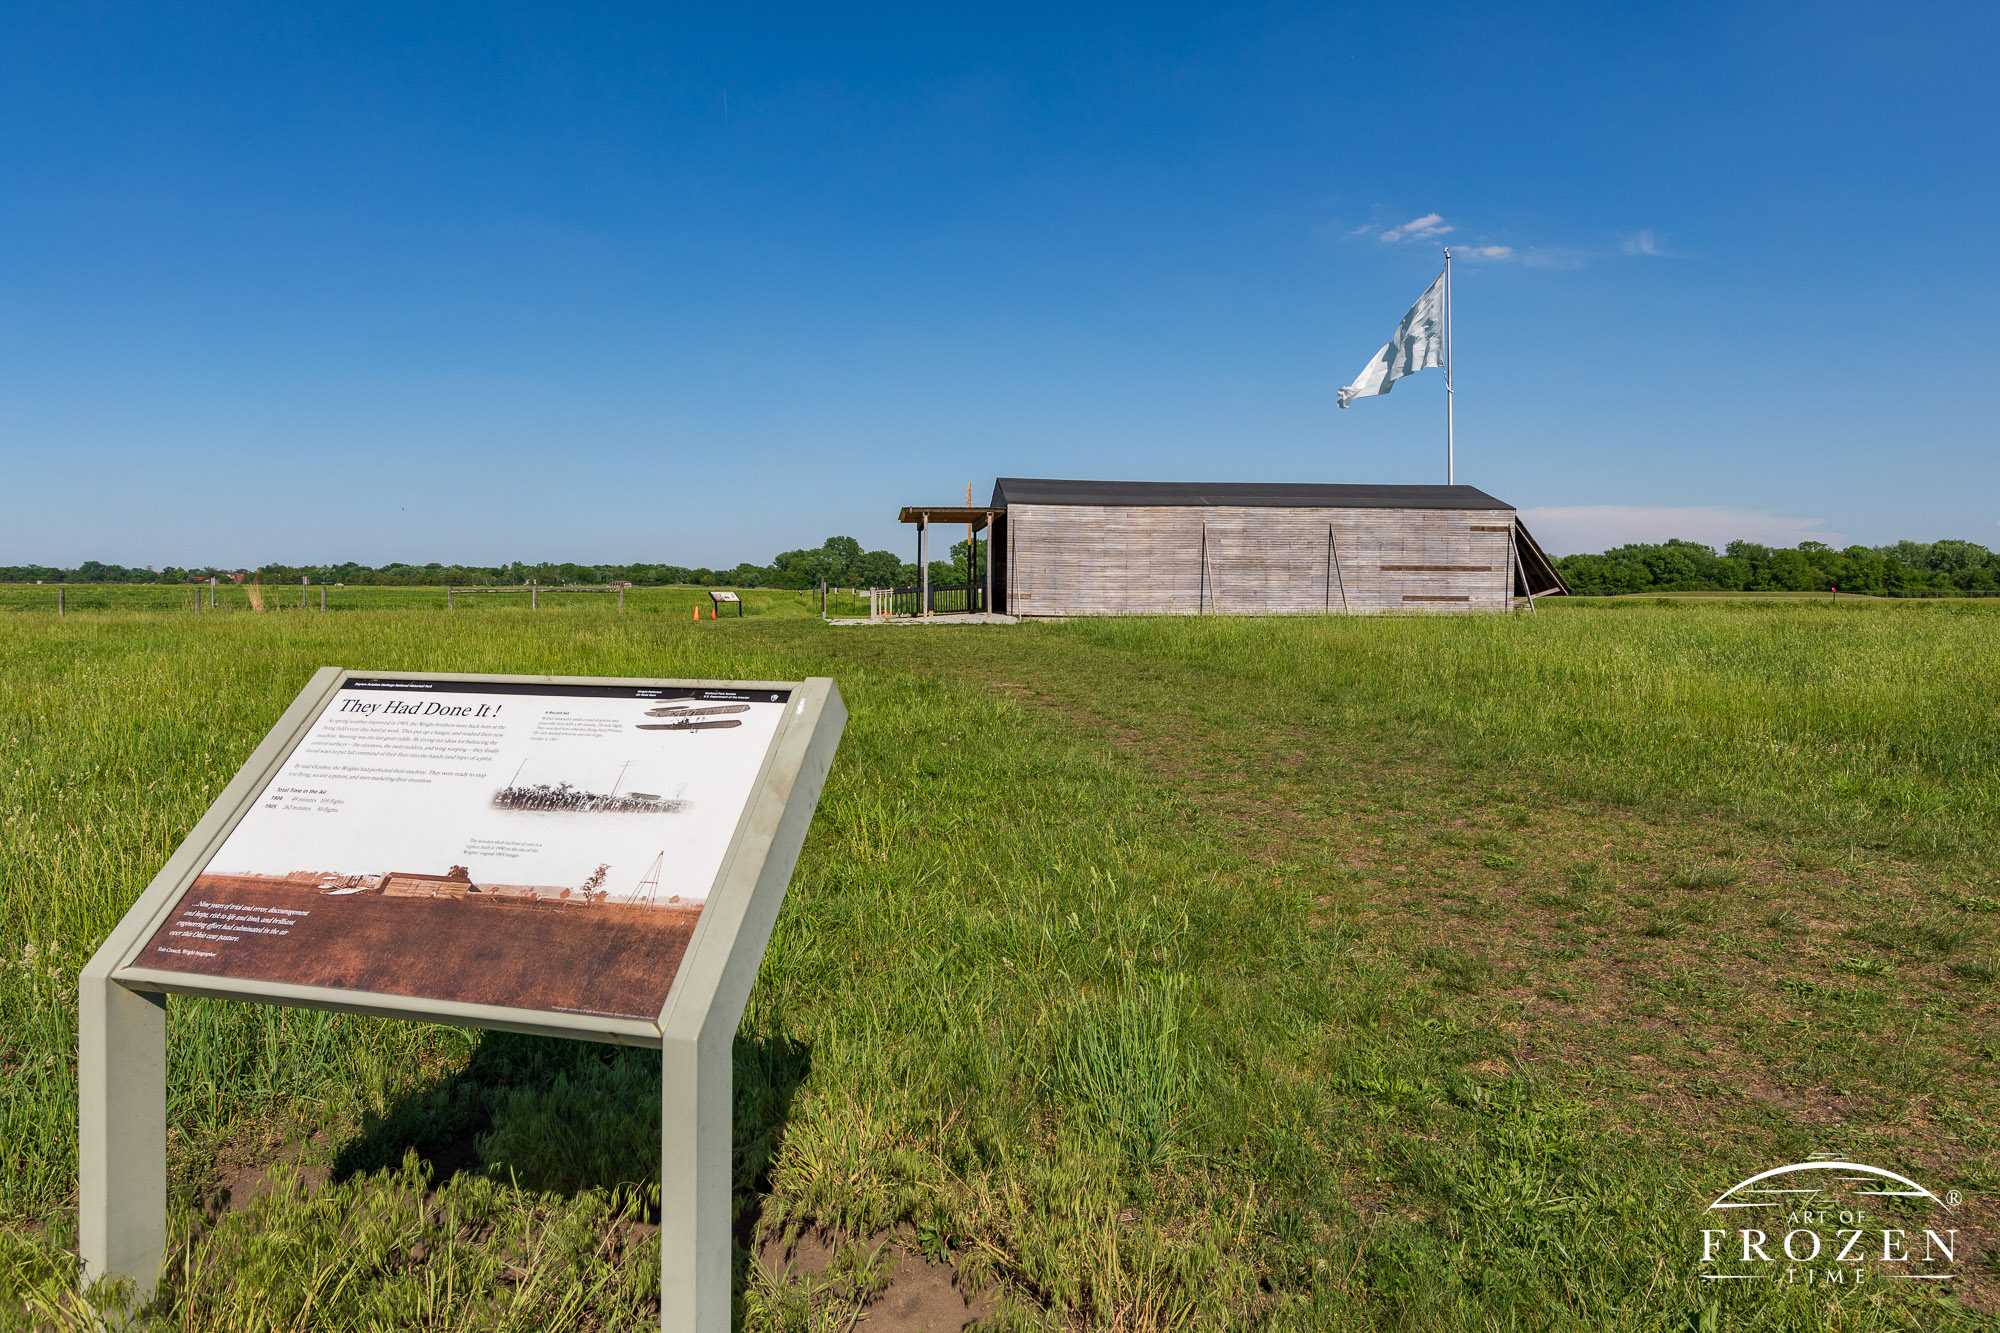 A summer view of replica Wrigth Brother hanger as it sits on Huffman Prairie under blue skies